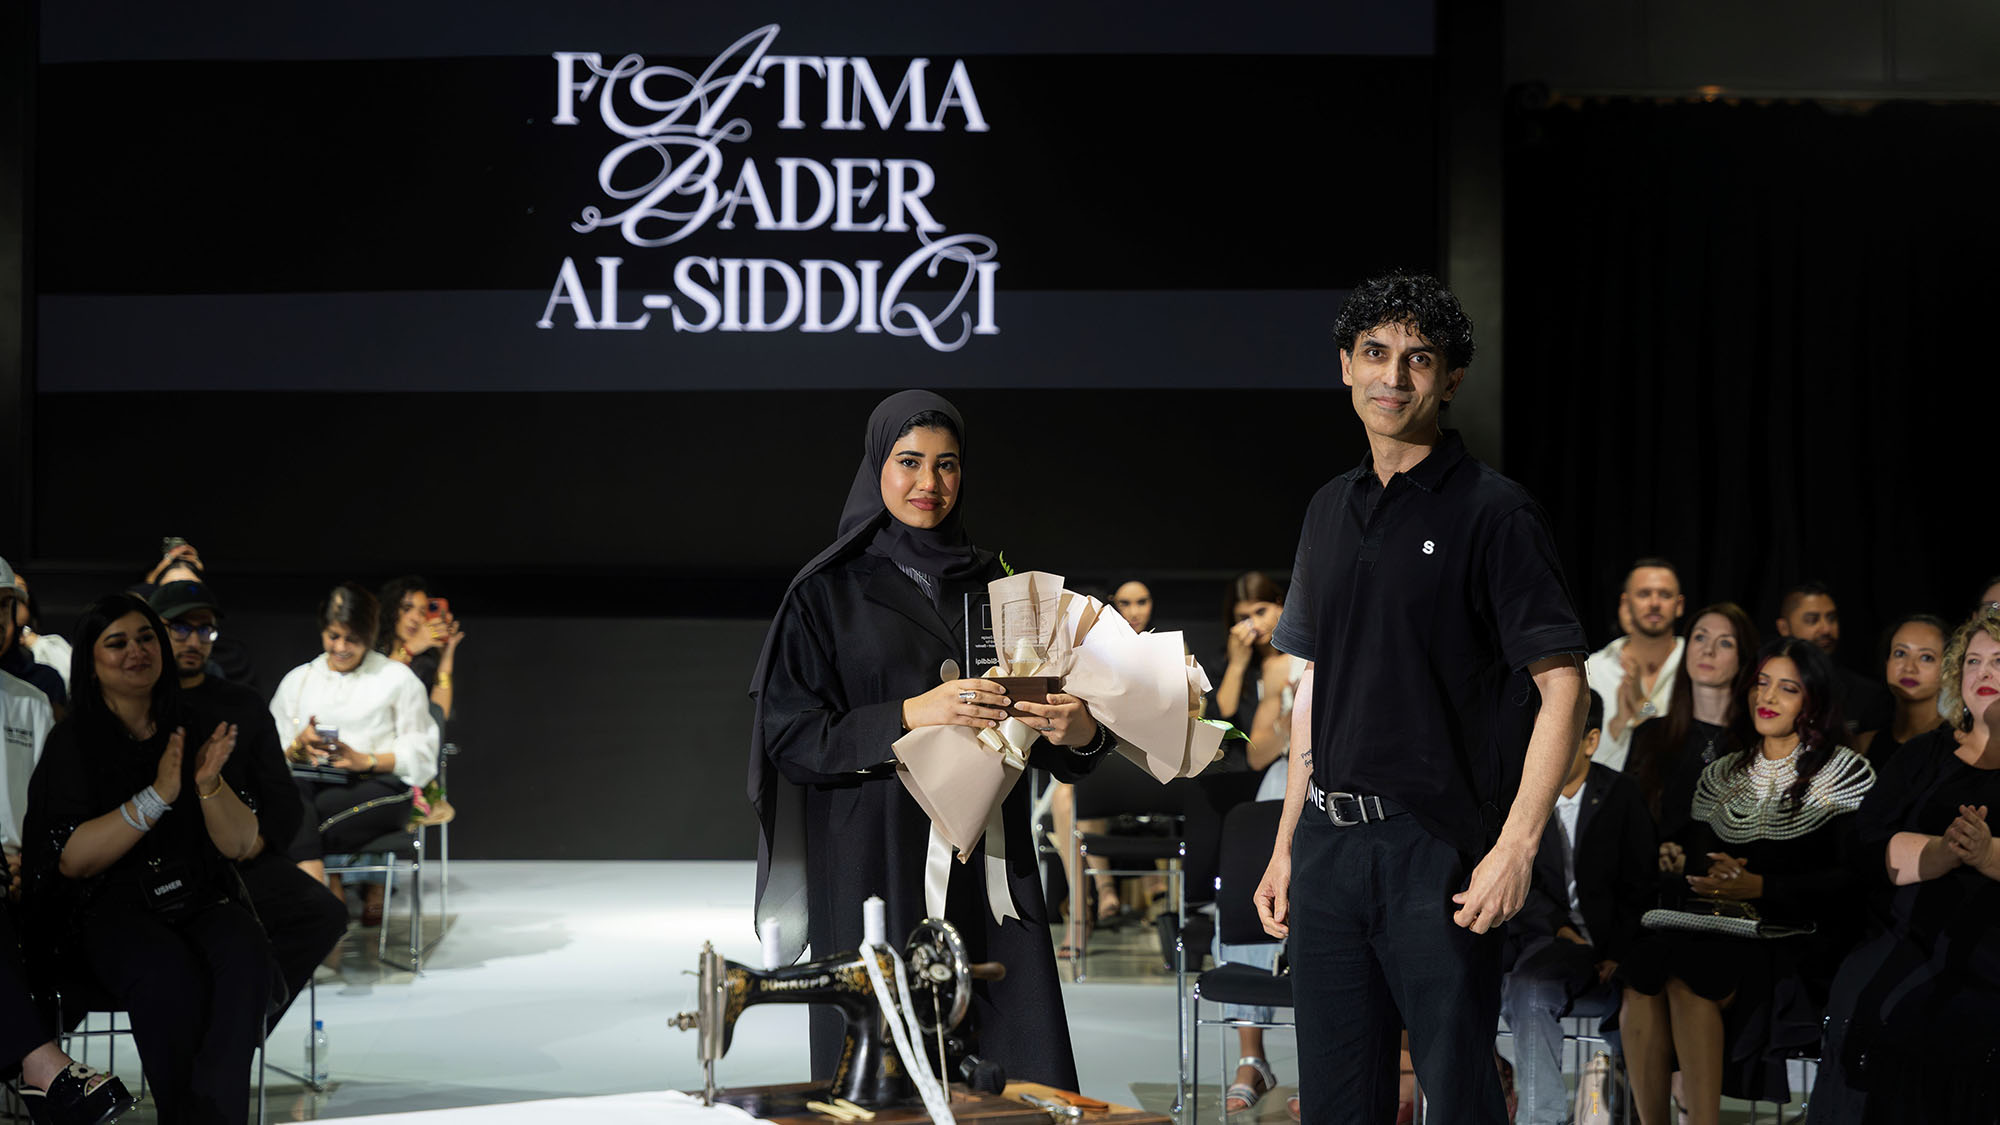 Fatima Bader Al Siddiqi won two awards : the Golden Needle Award for Most Outstanding Senior and the Outstanding Academic Achievement Award for a senior student from the graduating fashion design class . She's seen here receiving one of the awards from Professor Ali Khan 